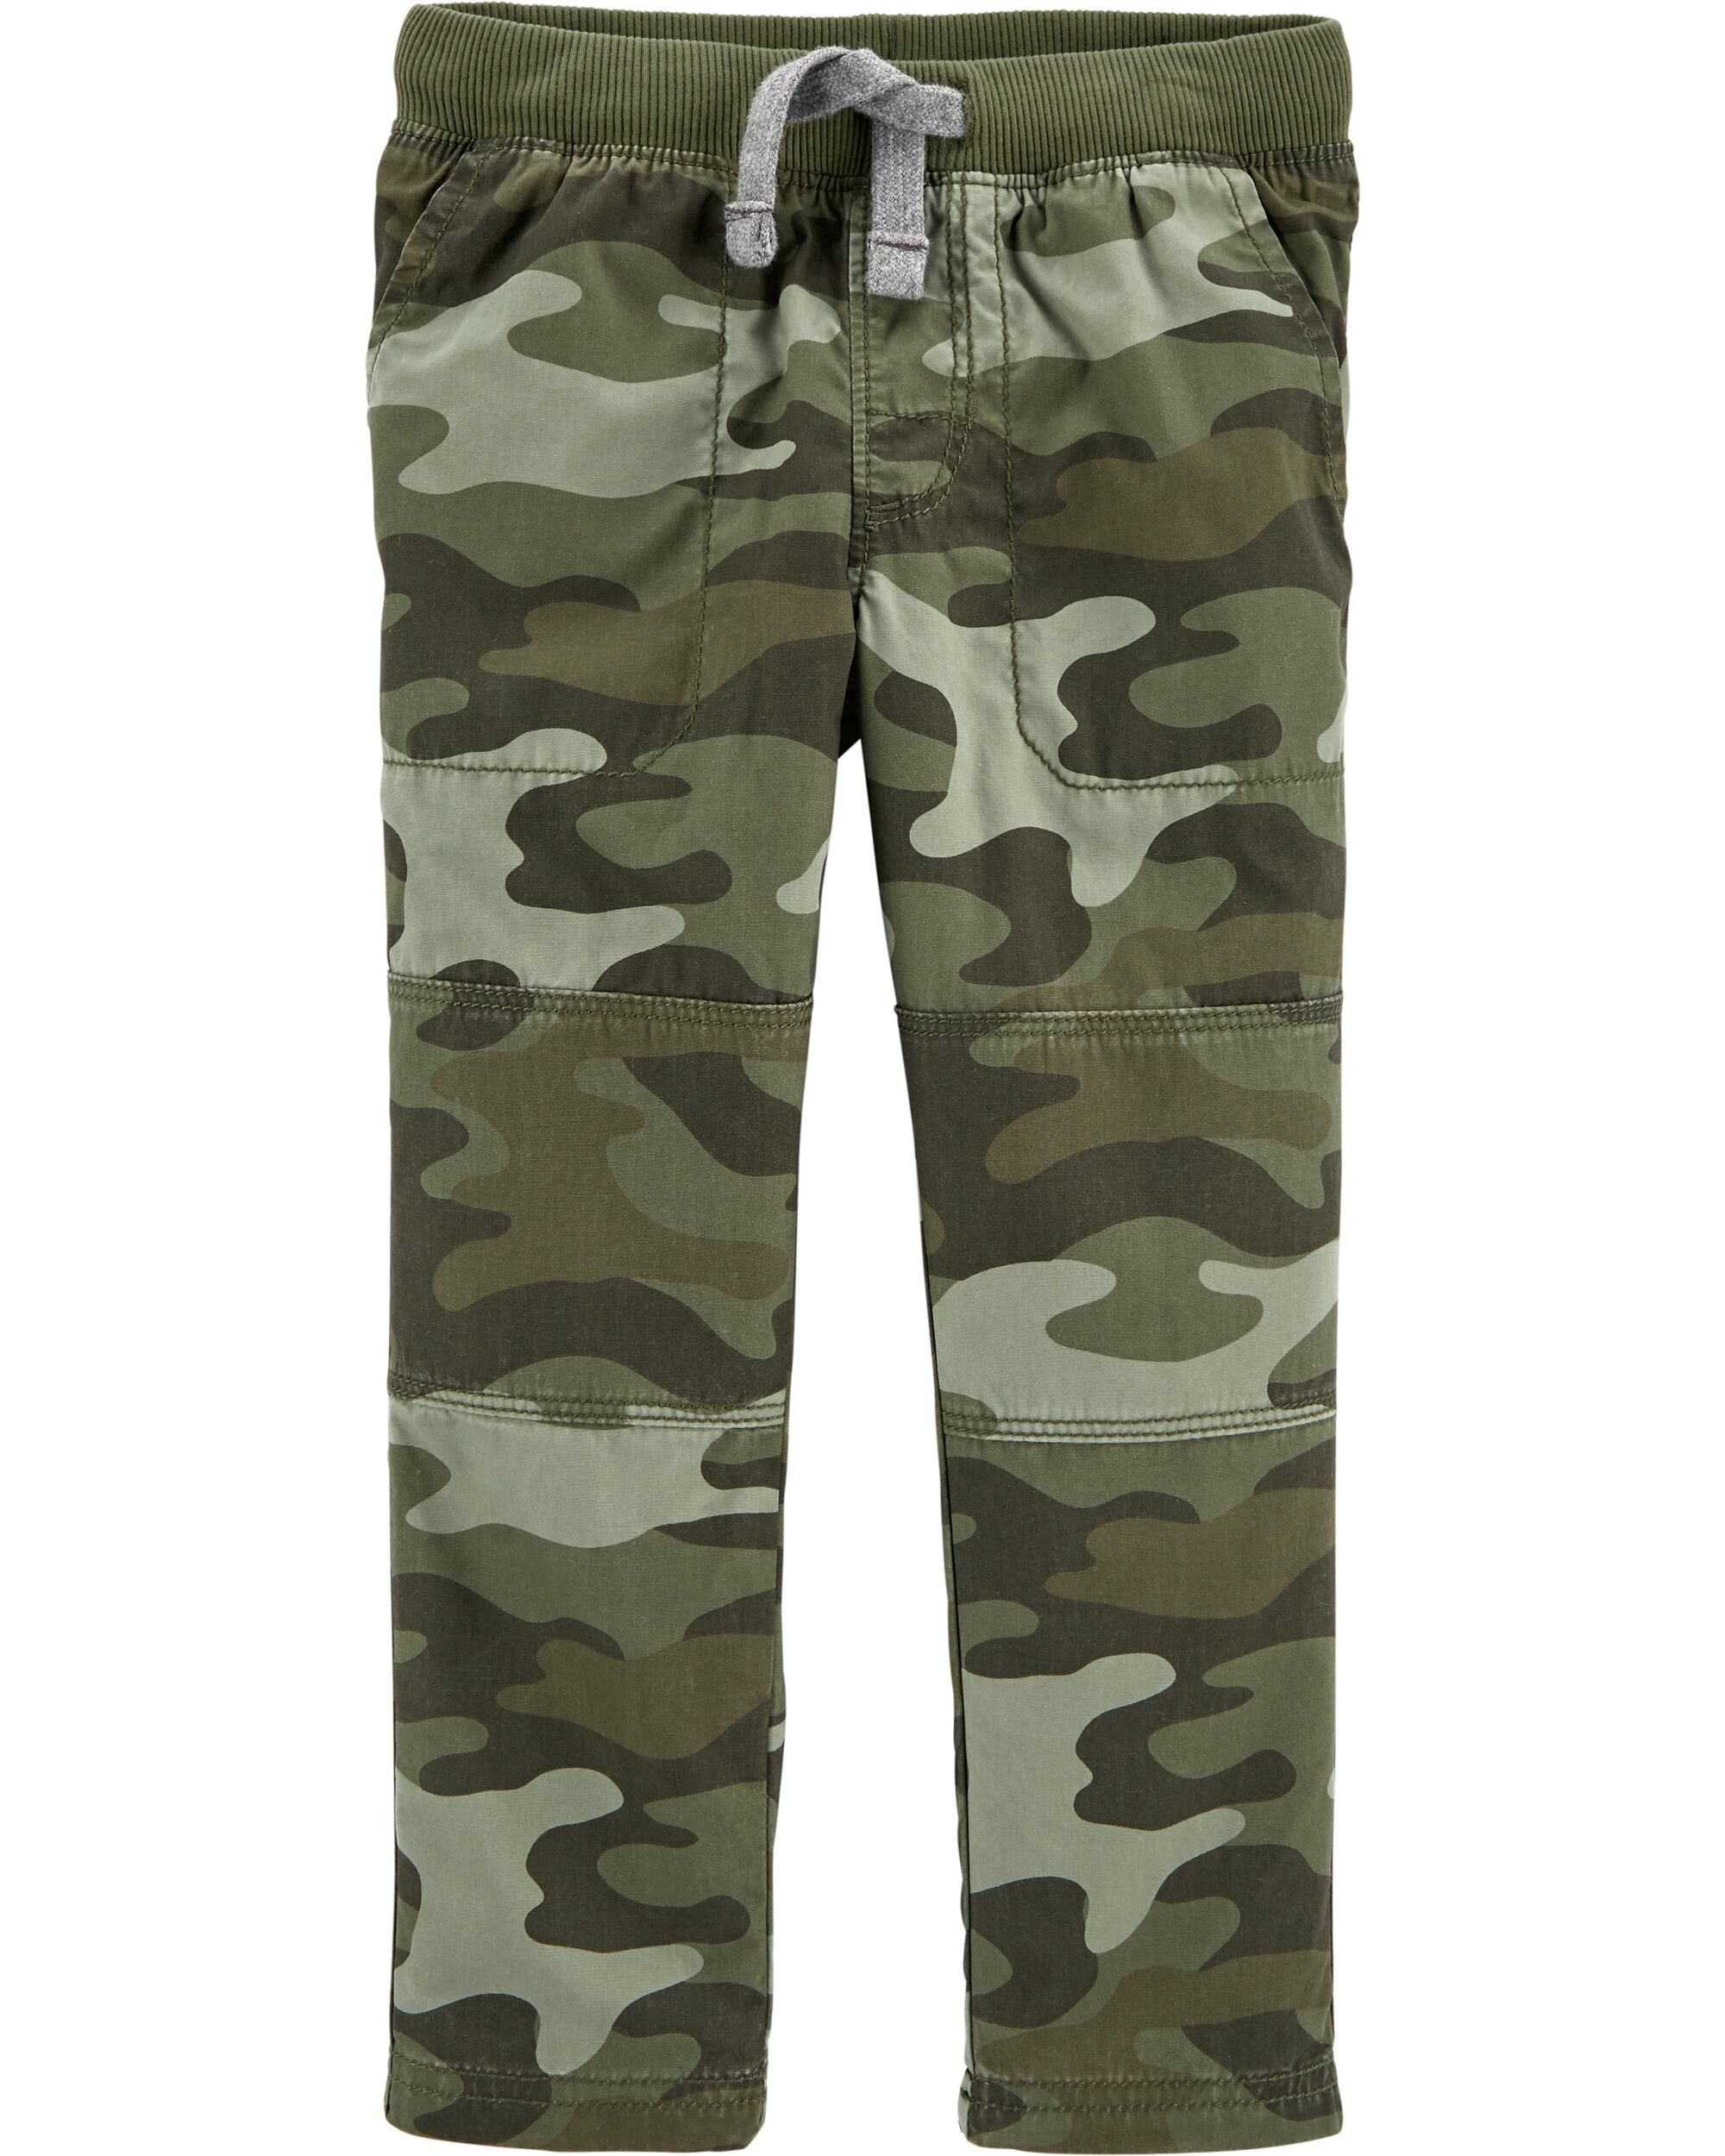  *CLEARANCE* Camo Pull-On Reinforced Knee Pants 